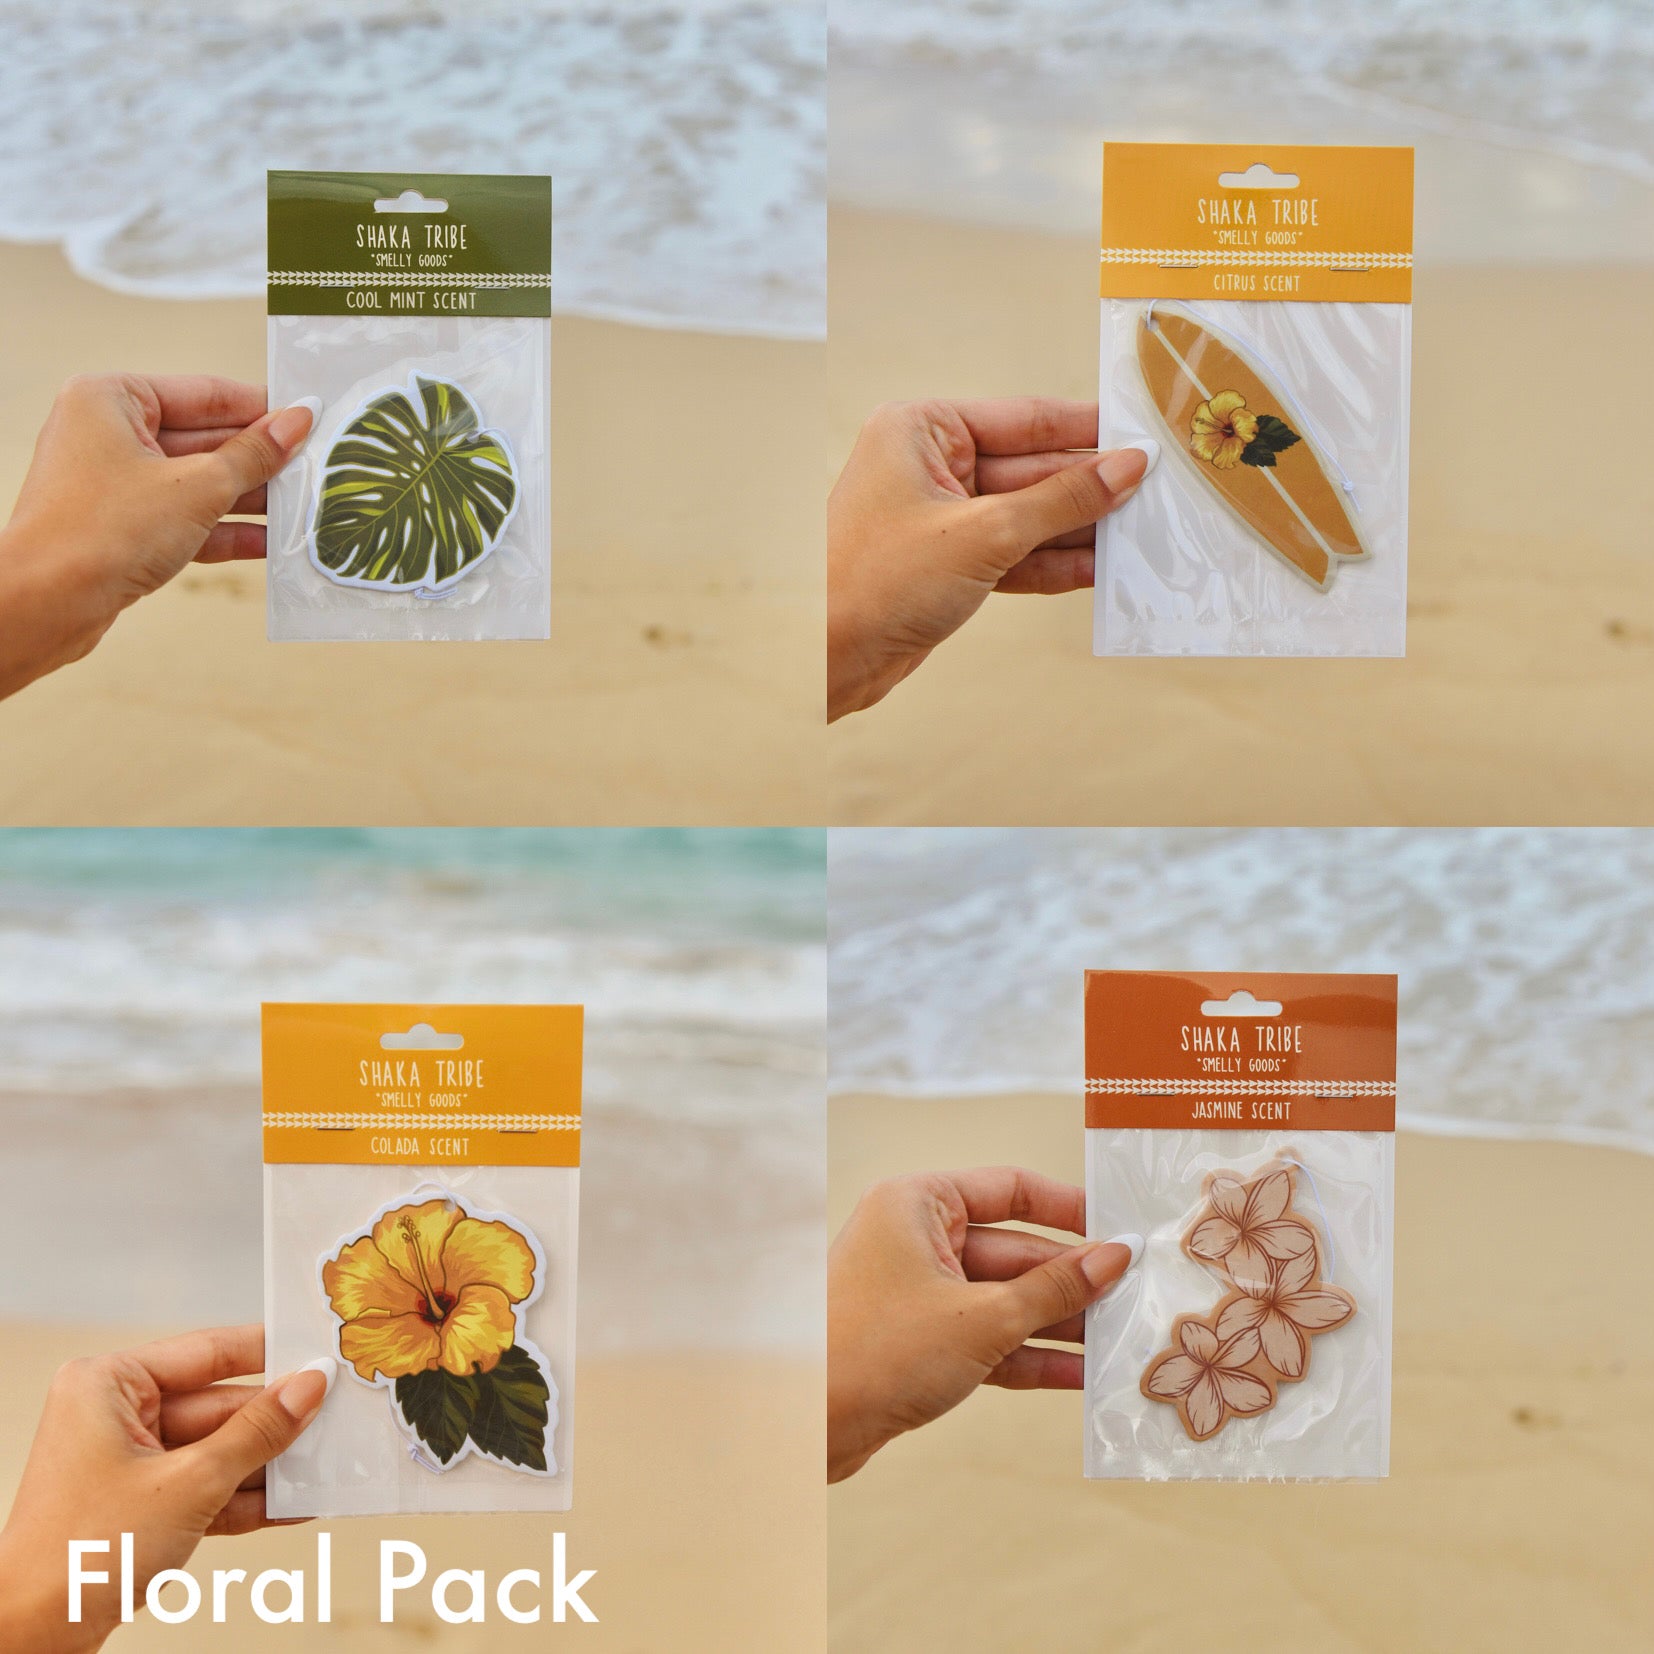 Floral Pack - "Smelly Goods" | Car Fresheners